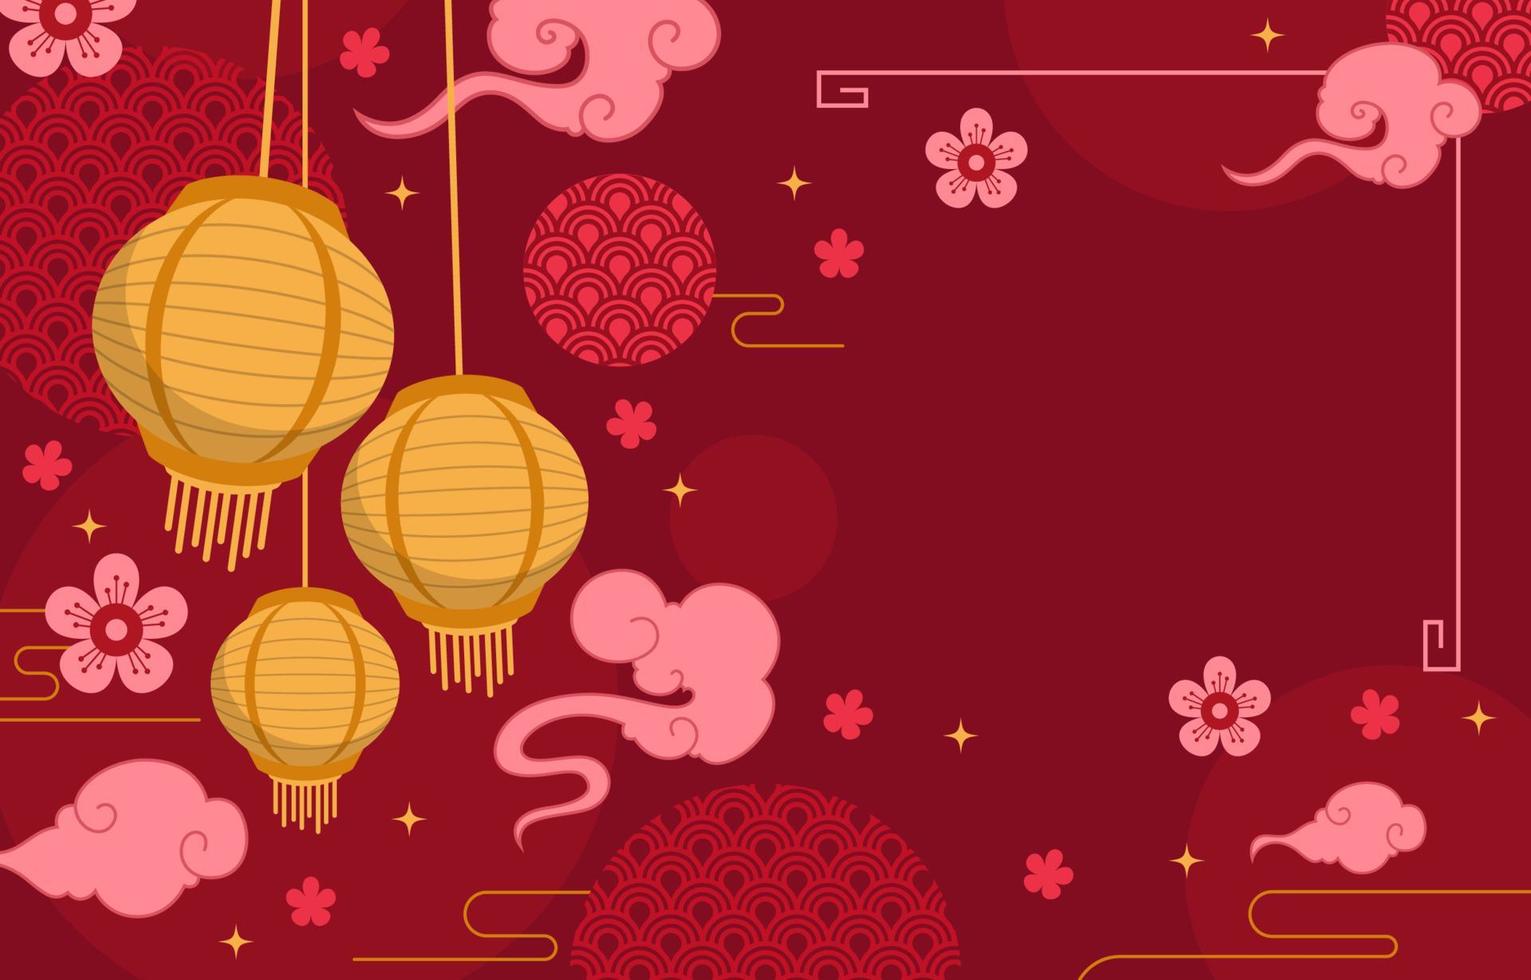 Background of Happy Chinese New Year with Lanterns vector